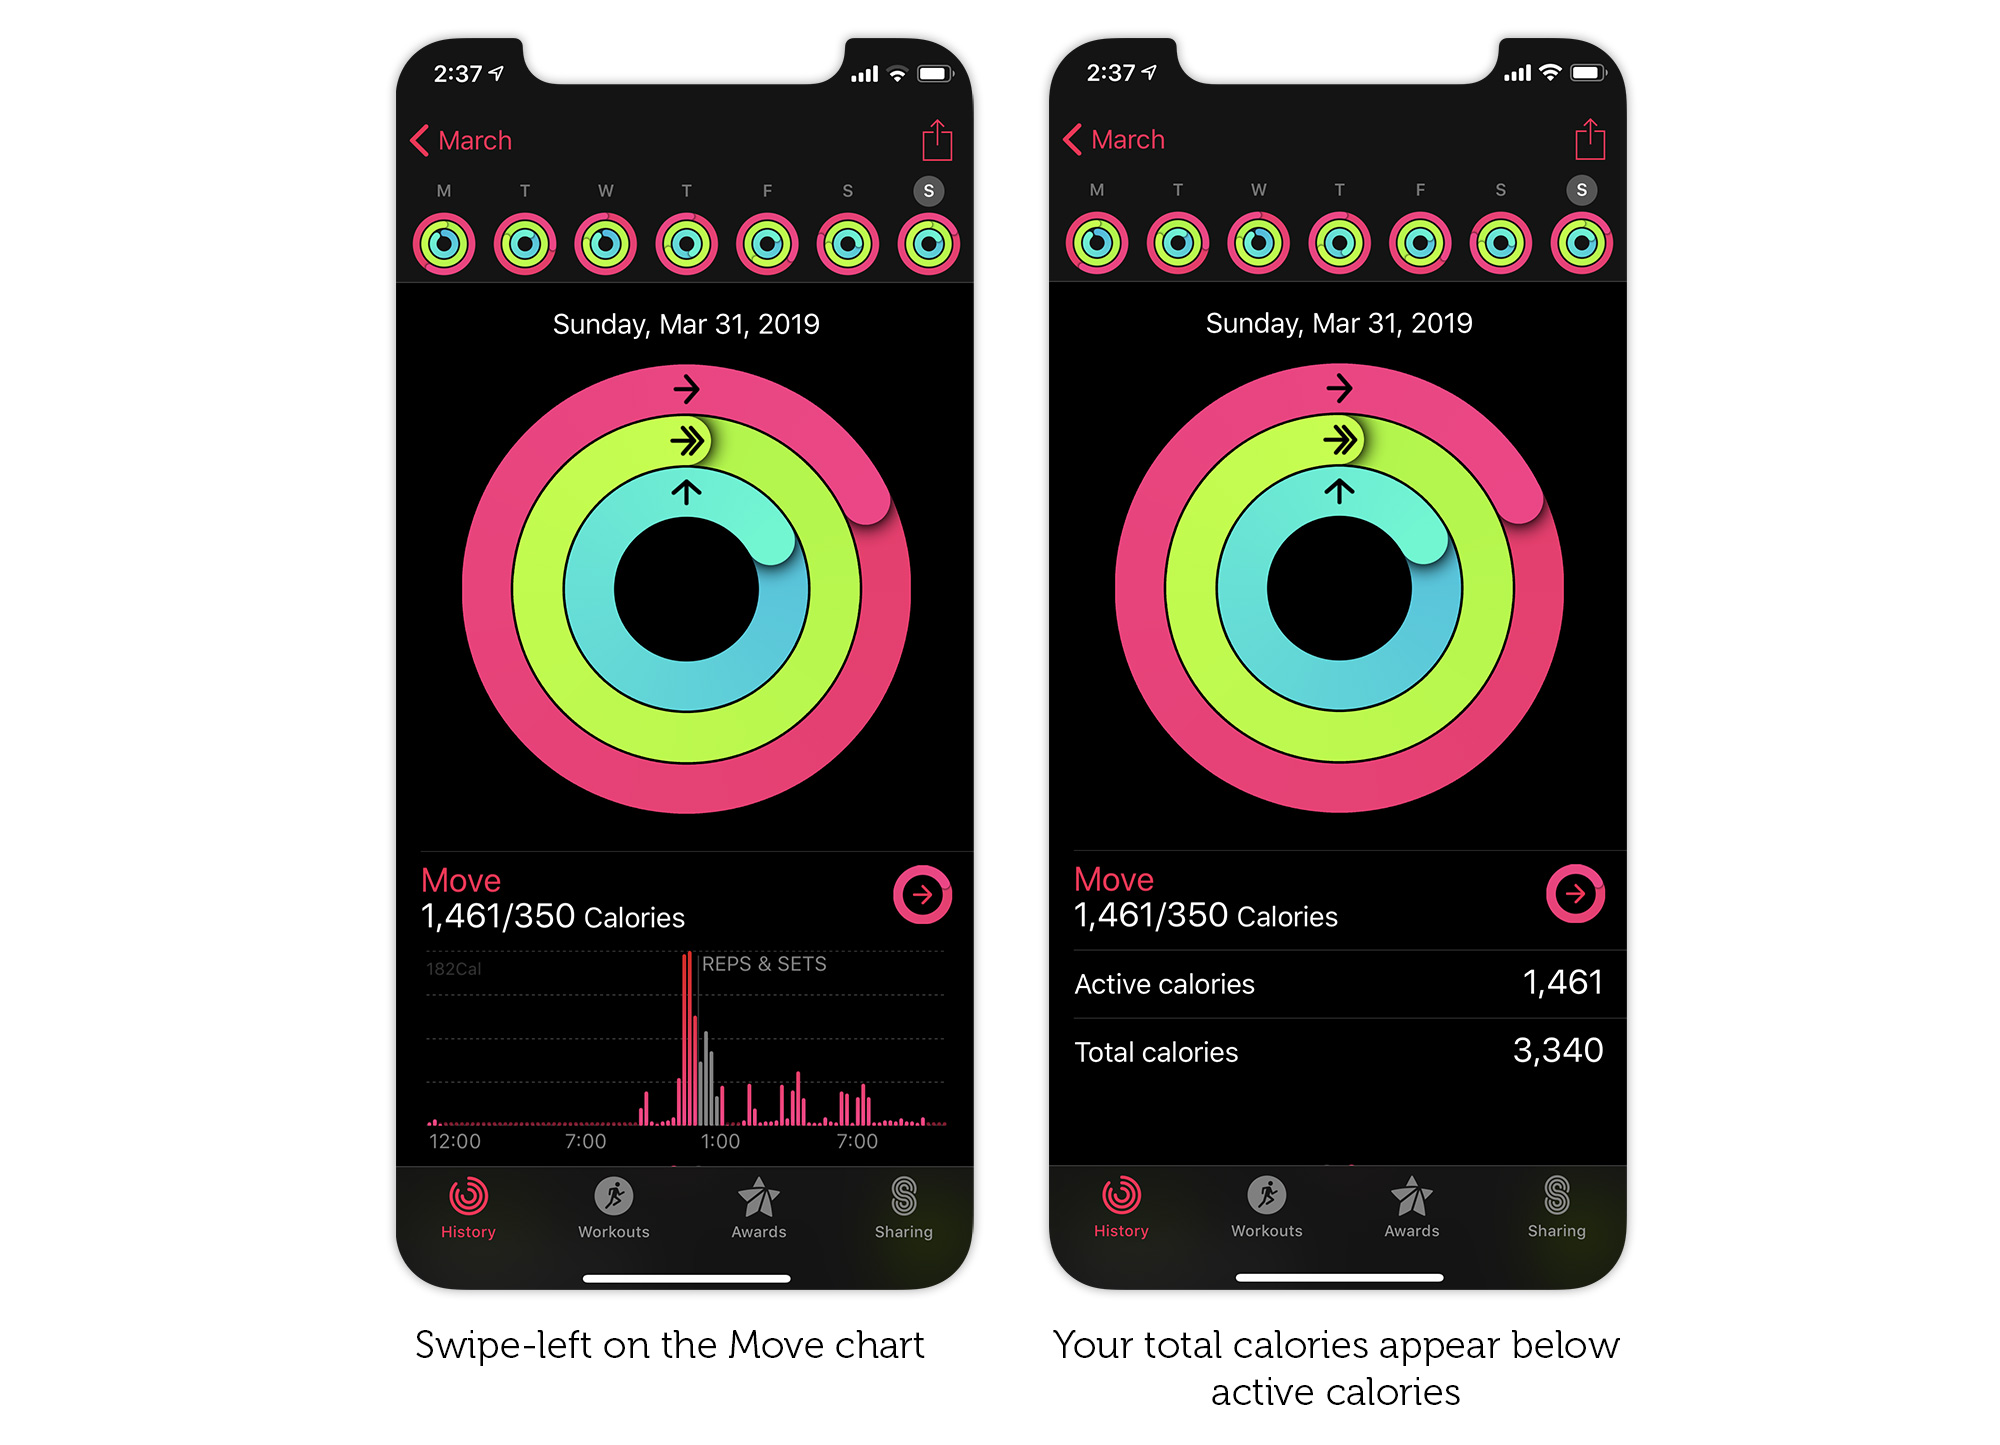 How to reveal your total calories in the iPhone Activity app.